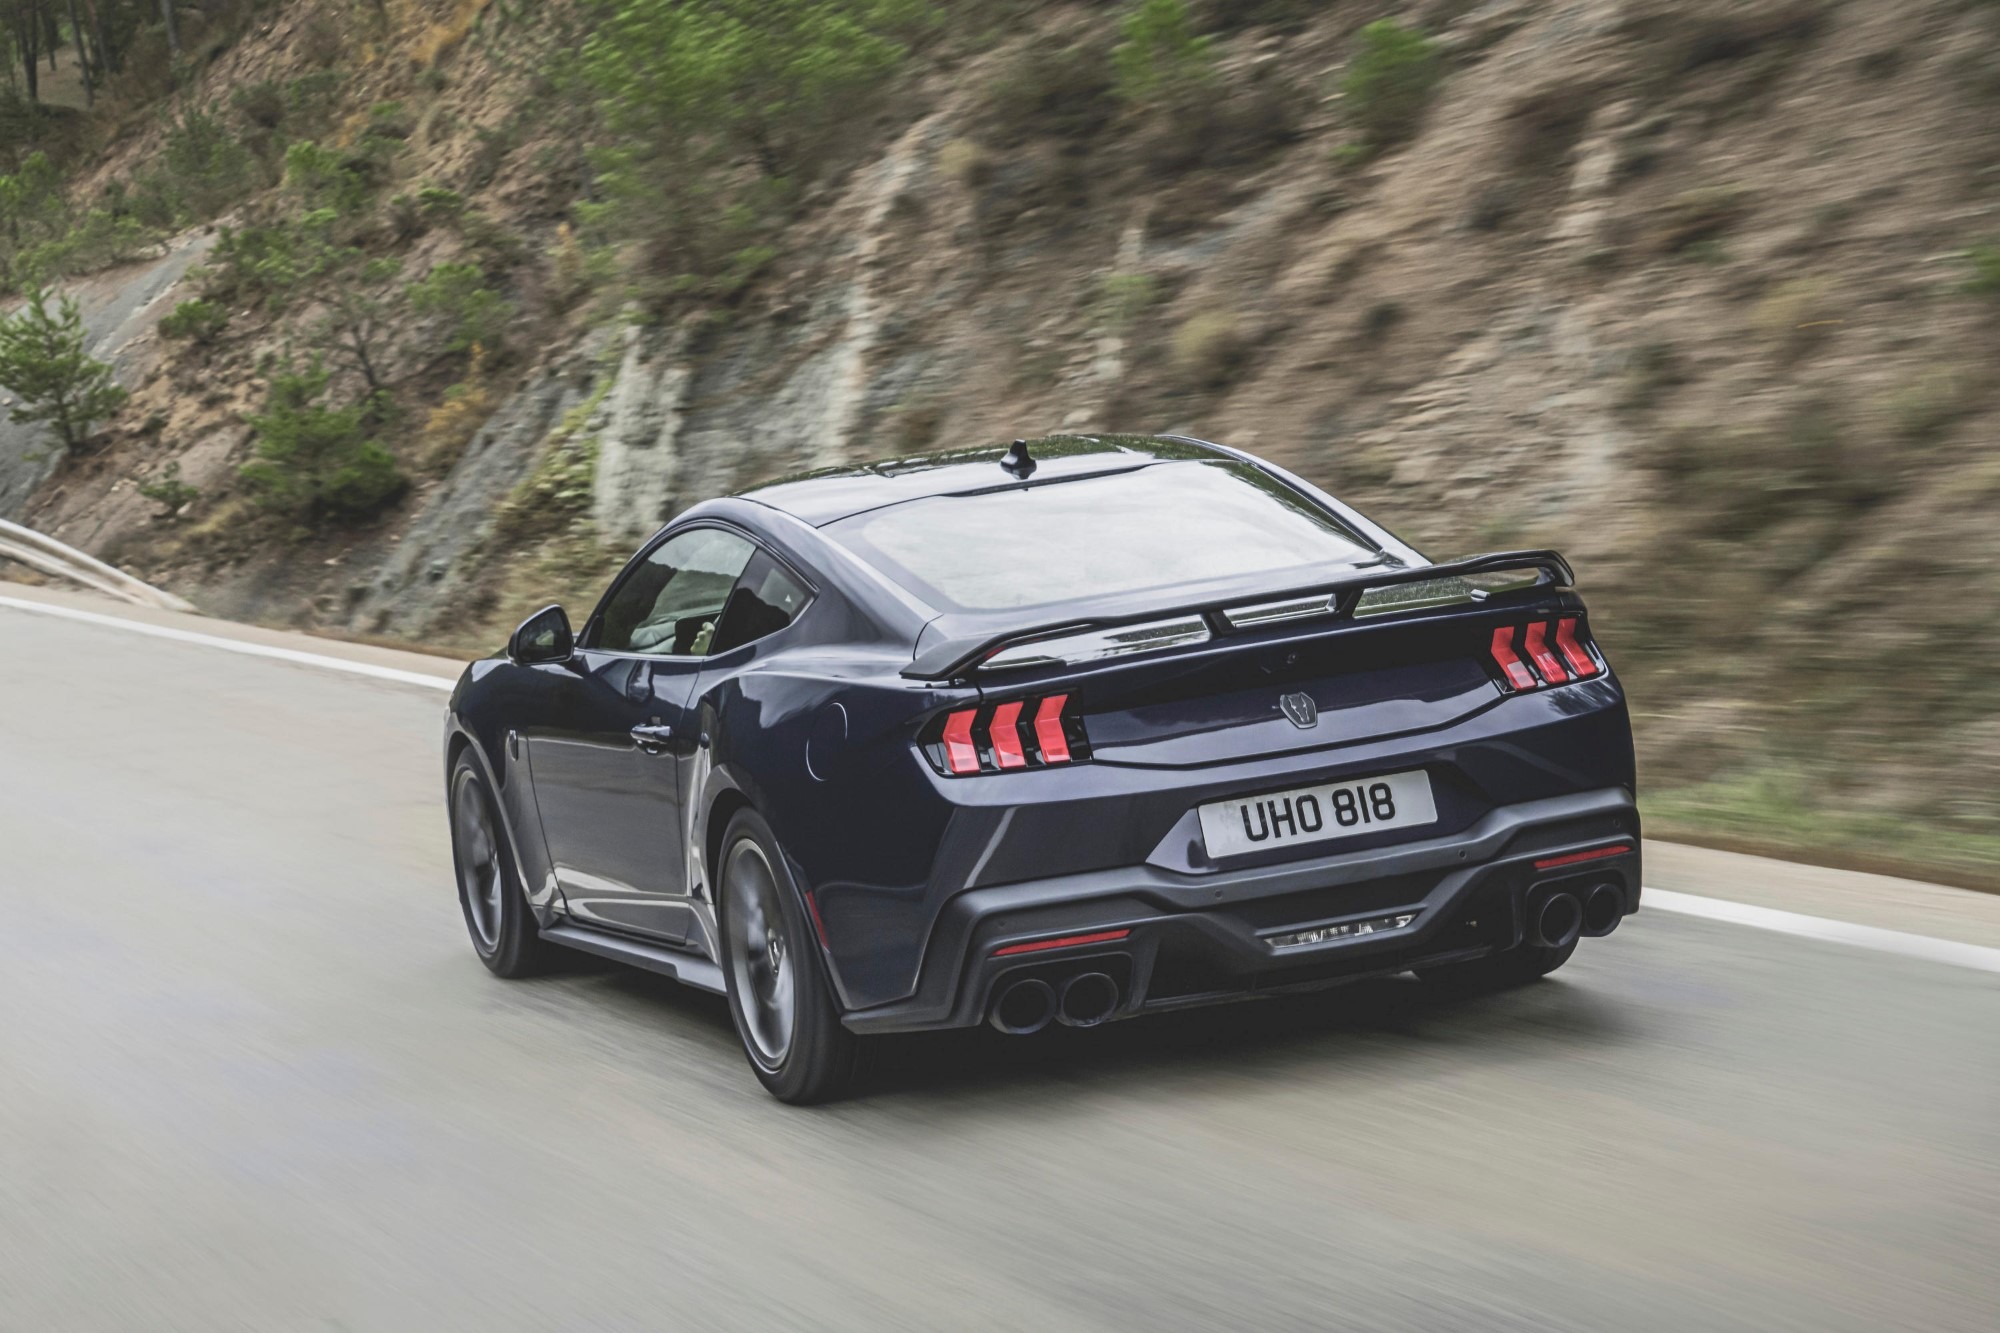 Black Horse: Η κορυφαία έκδοση της νέας Ford Mustang